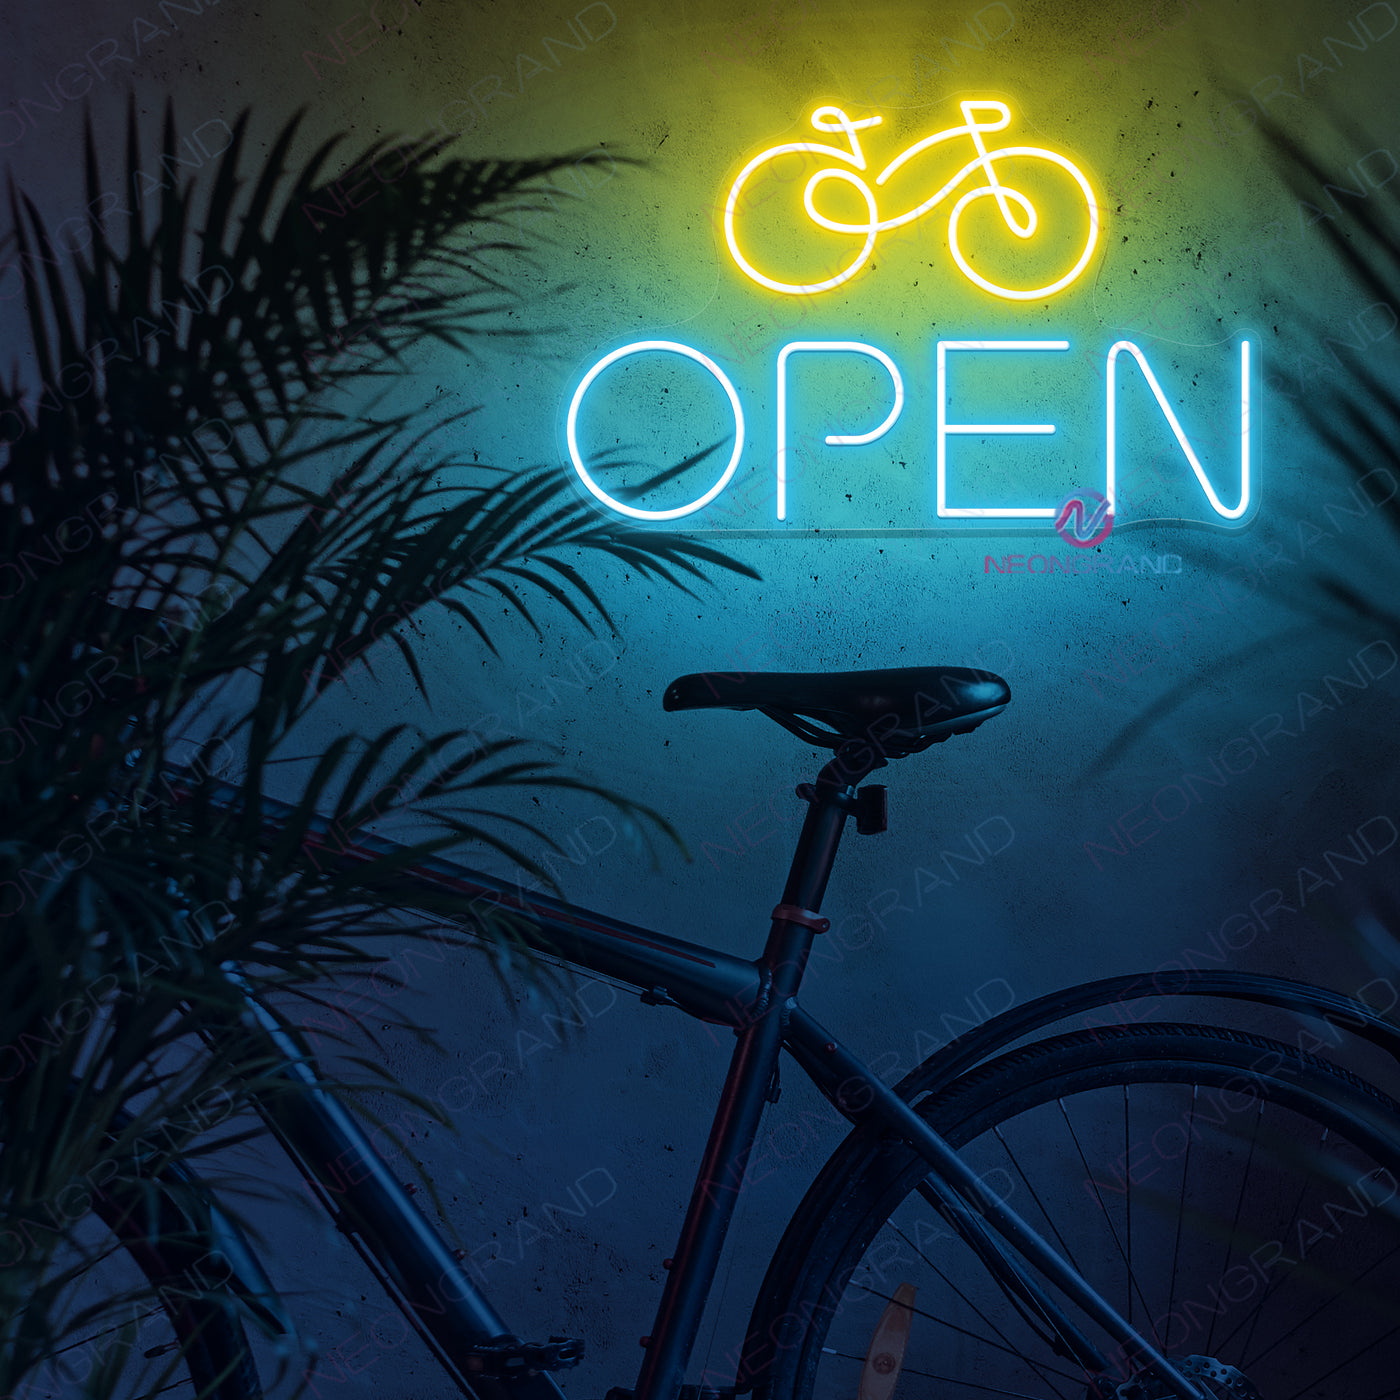 Neon Open Sign Bicycle Led Light